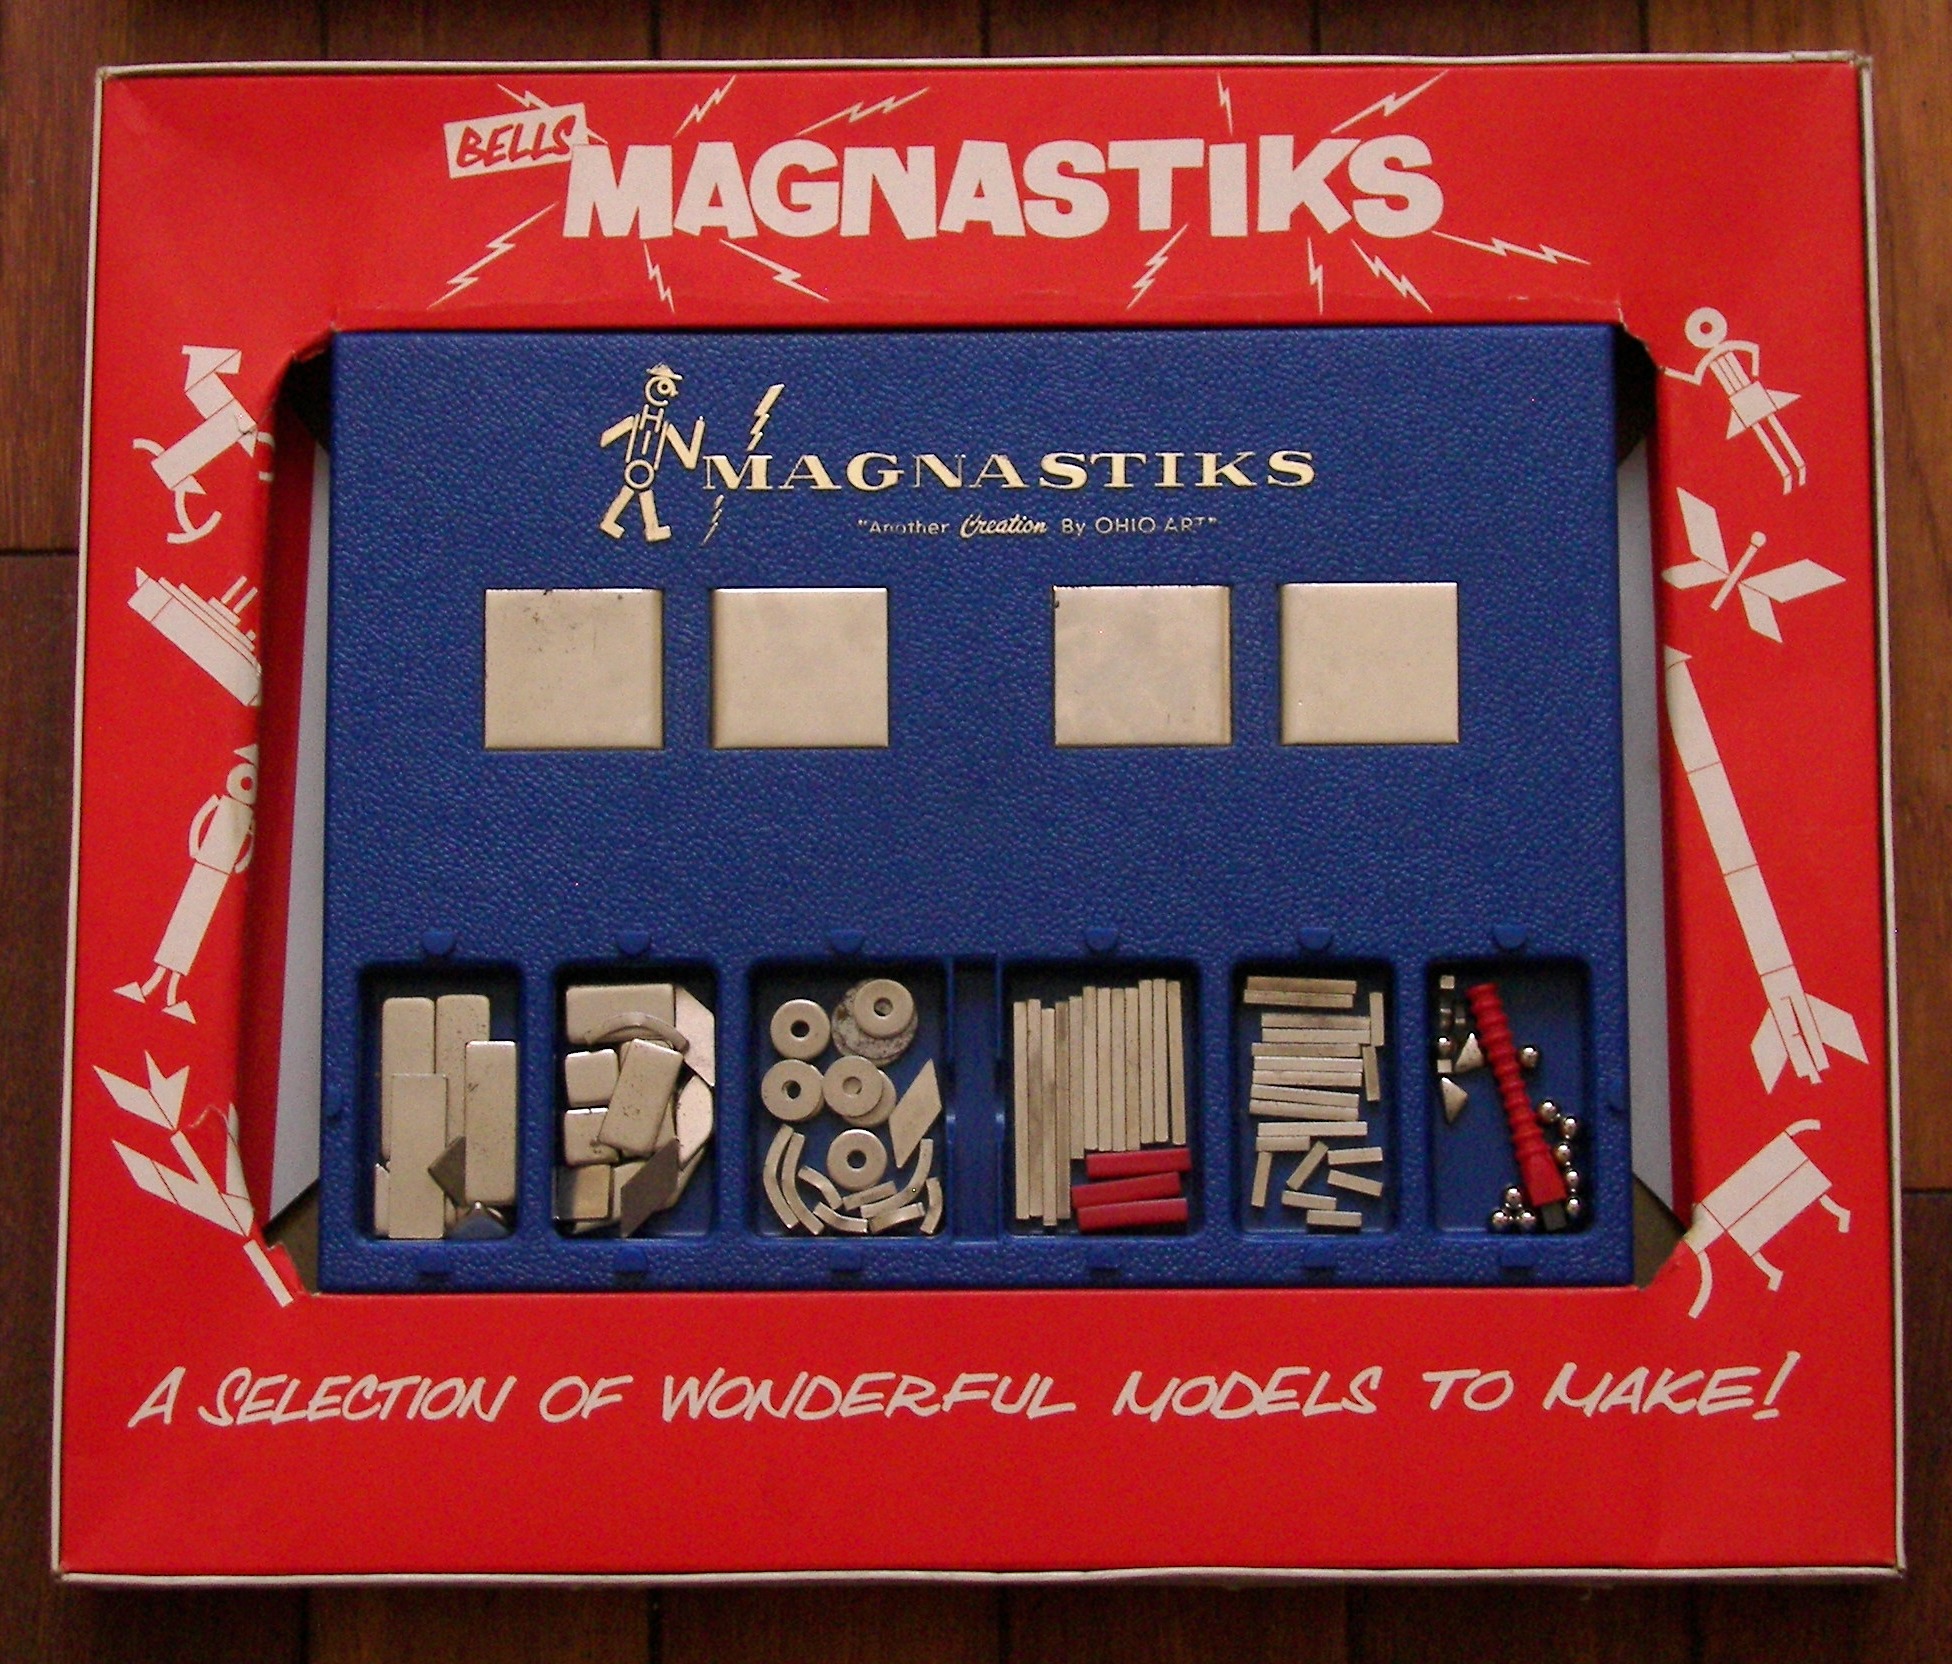 1950's Magnastiks by Bell Toys, London, England - tomsk3000